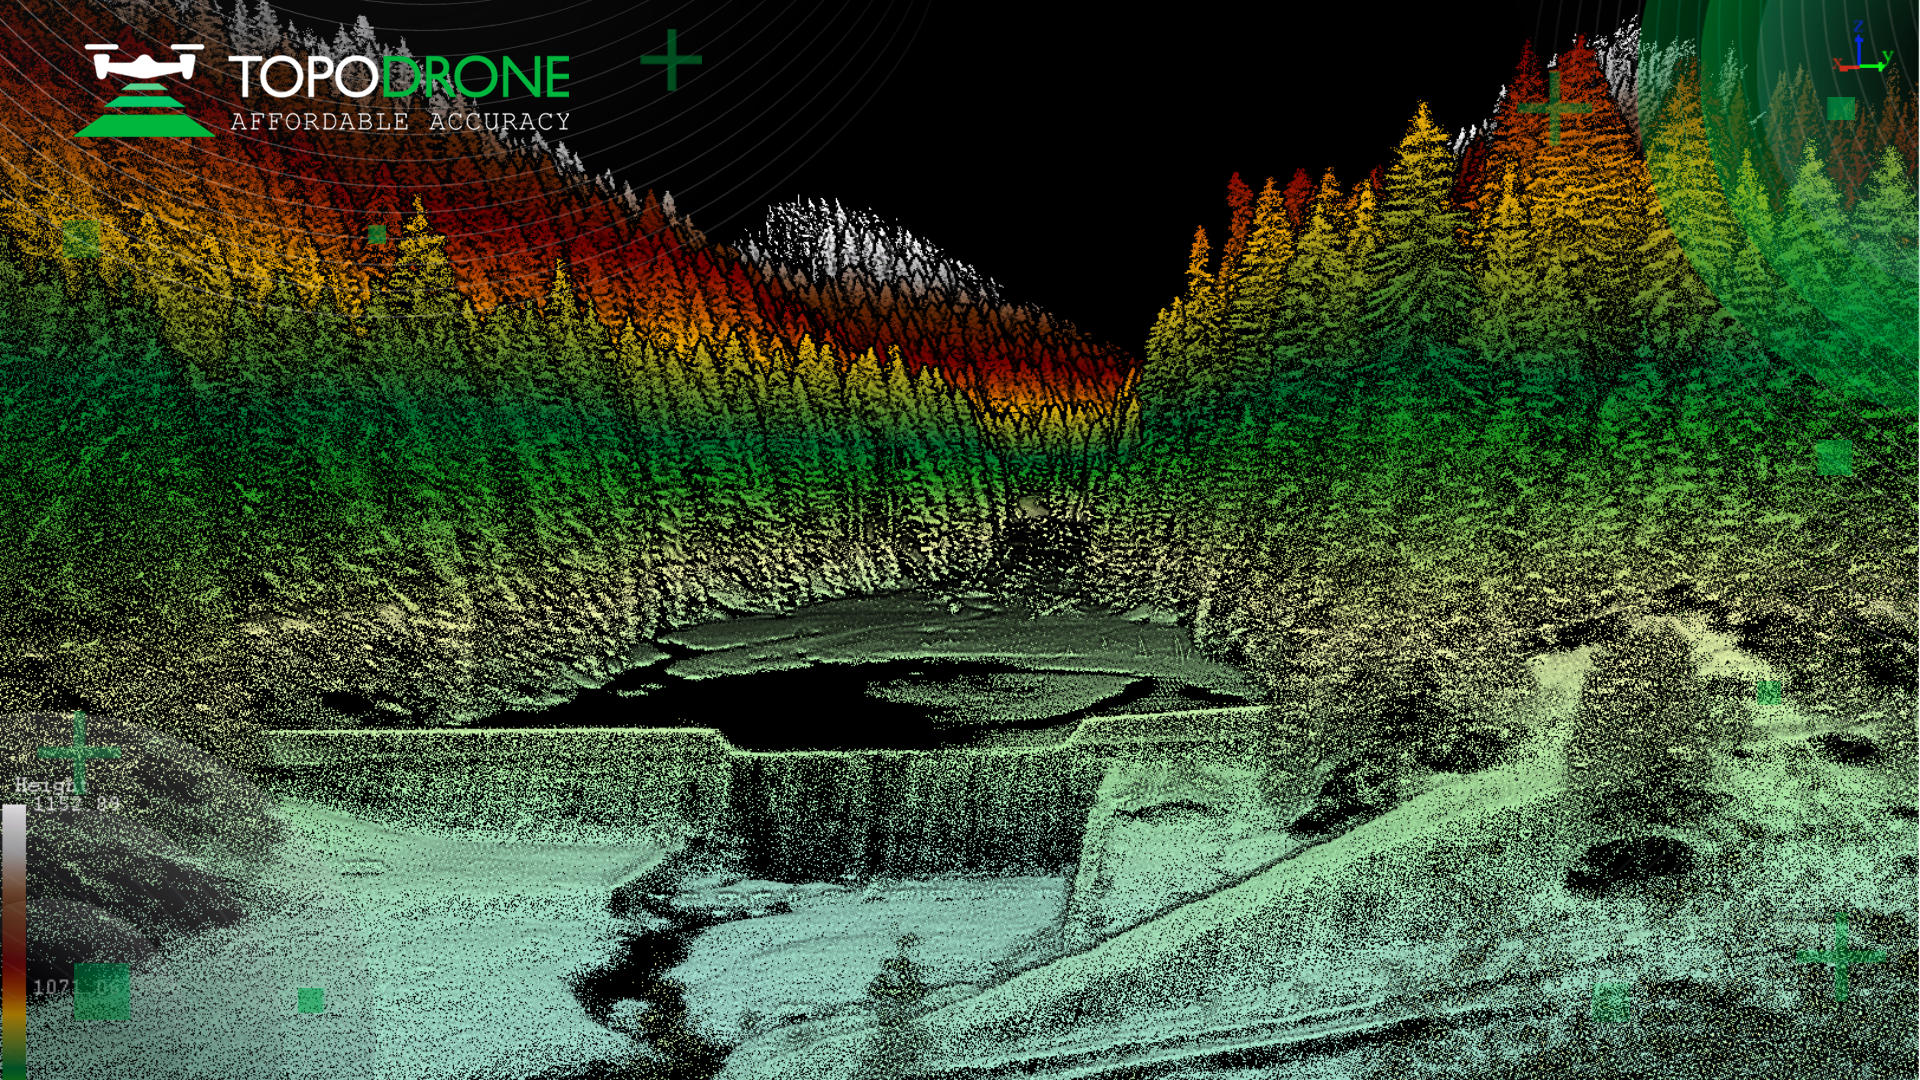 New Lightweight 360 Degree Lidar Launched by TOPODRONE cloud